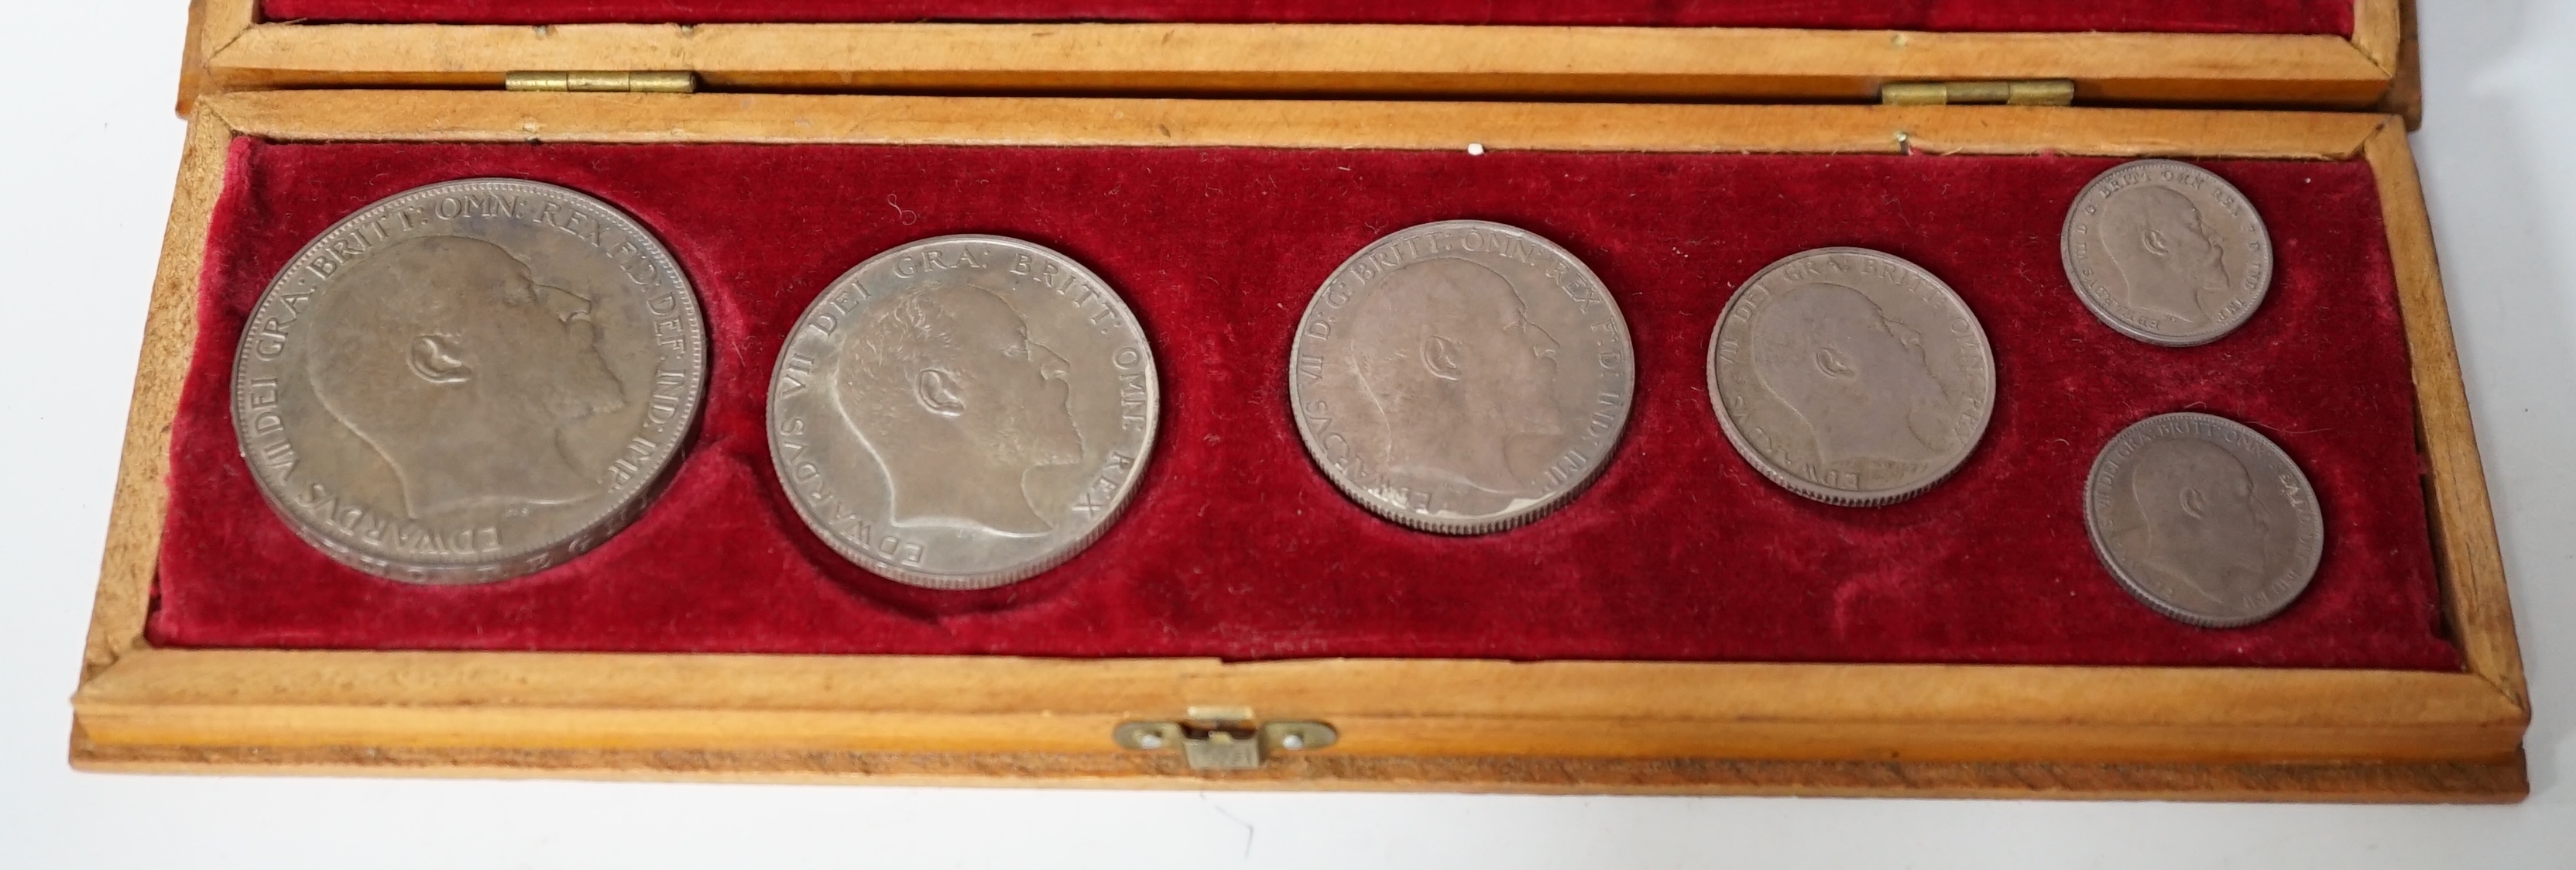 British silver proof coins, 1902 Edward VII matt proof six coin set ranging from crown to sixpence and a maundy fourpence, dark toning, associated case